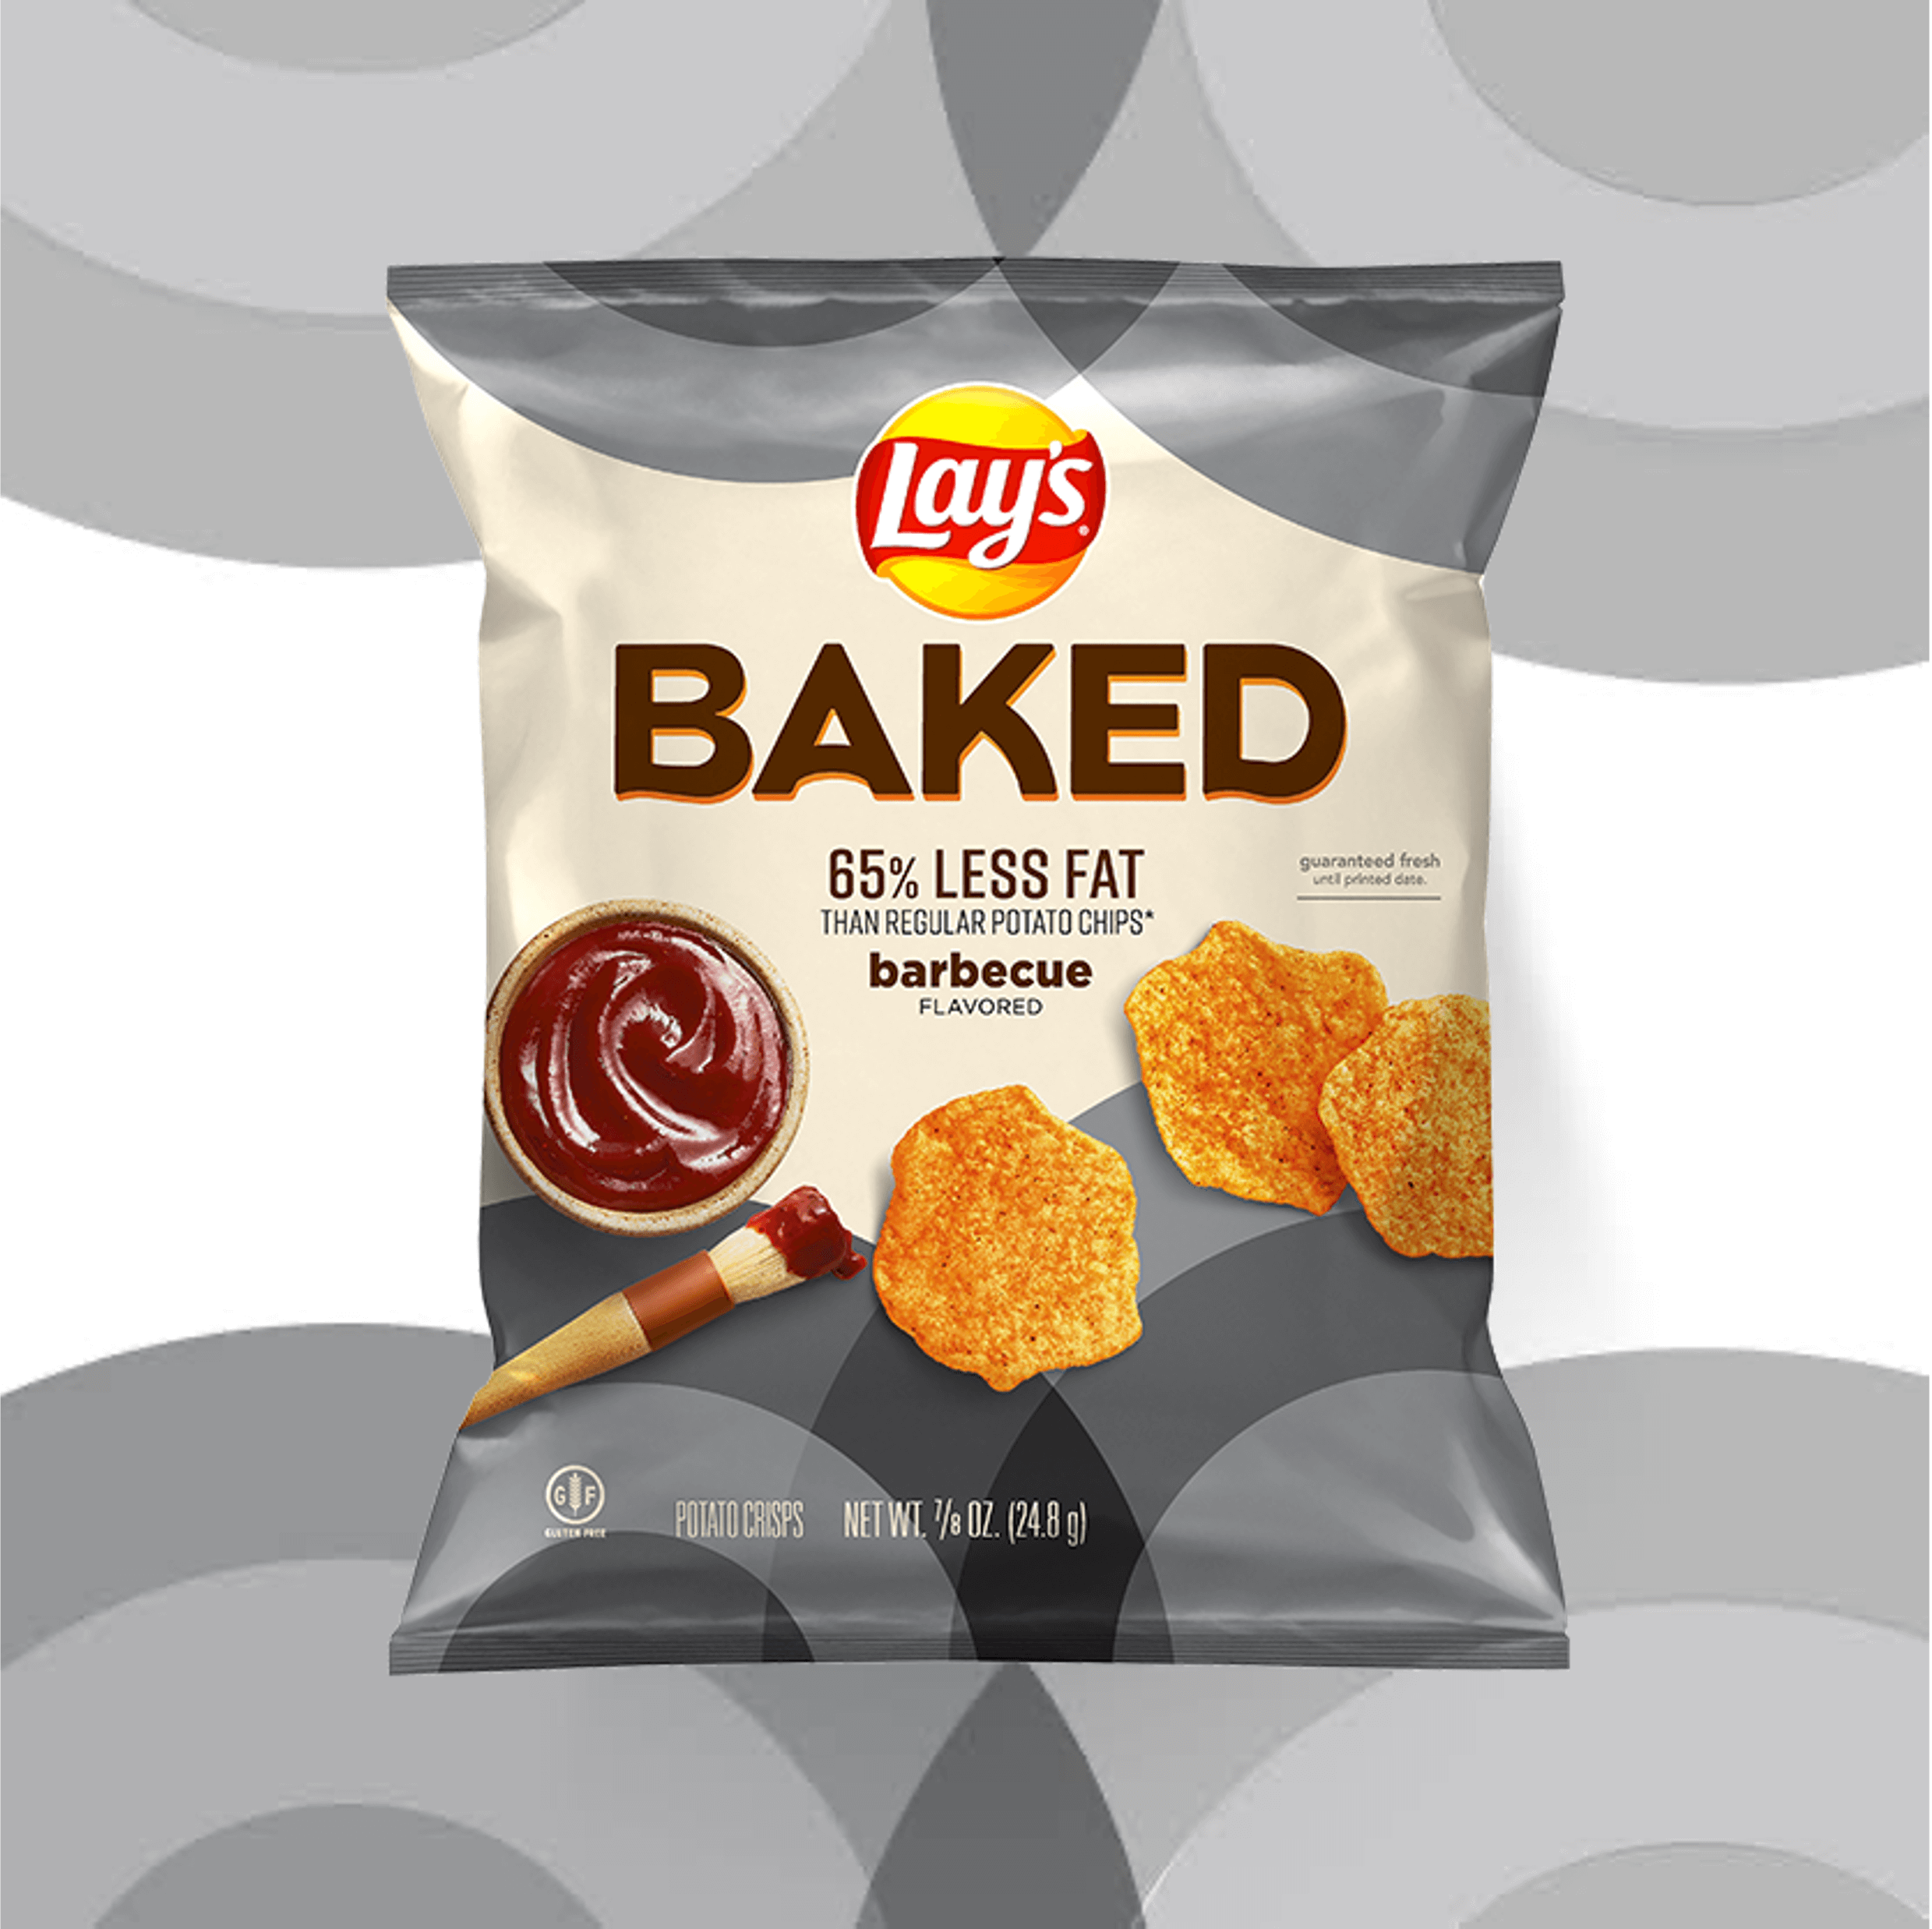 https://www.lays.com/sites/lays.com/files/2022-08/0.02%20BAKED%20BBQ%20%281%29.png